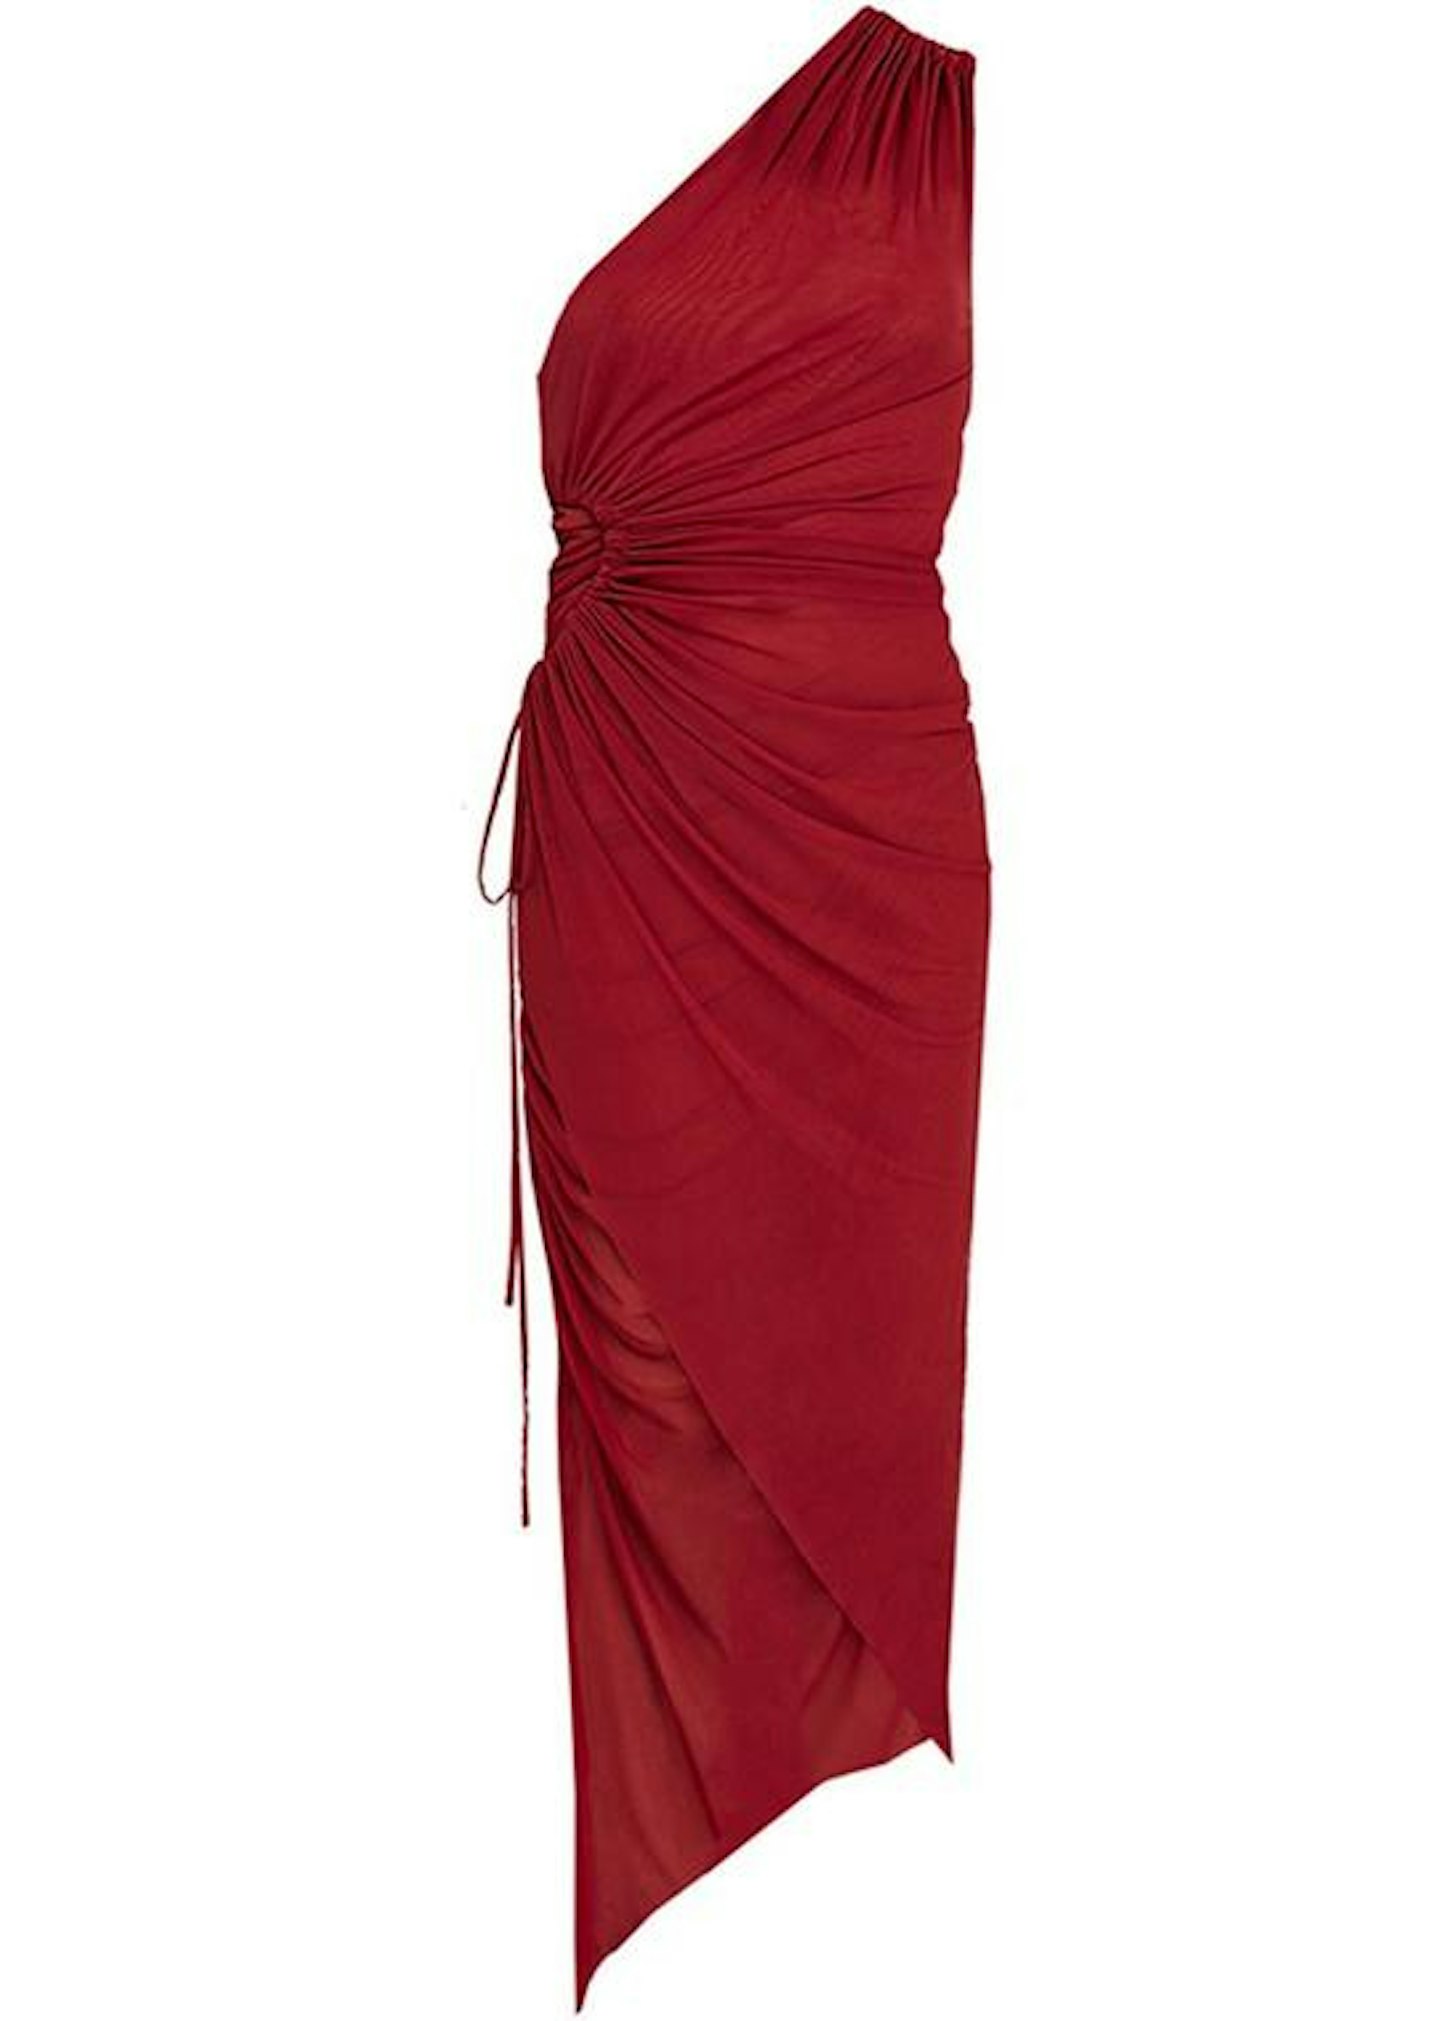 SlowCo, D THE BRAND, Red Tulle Midi Dress, £227